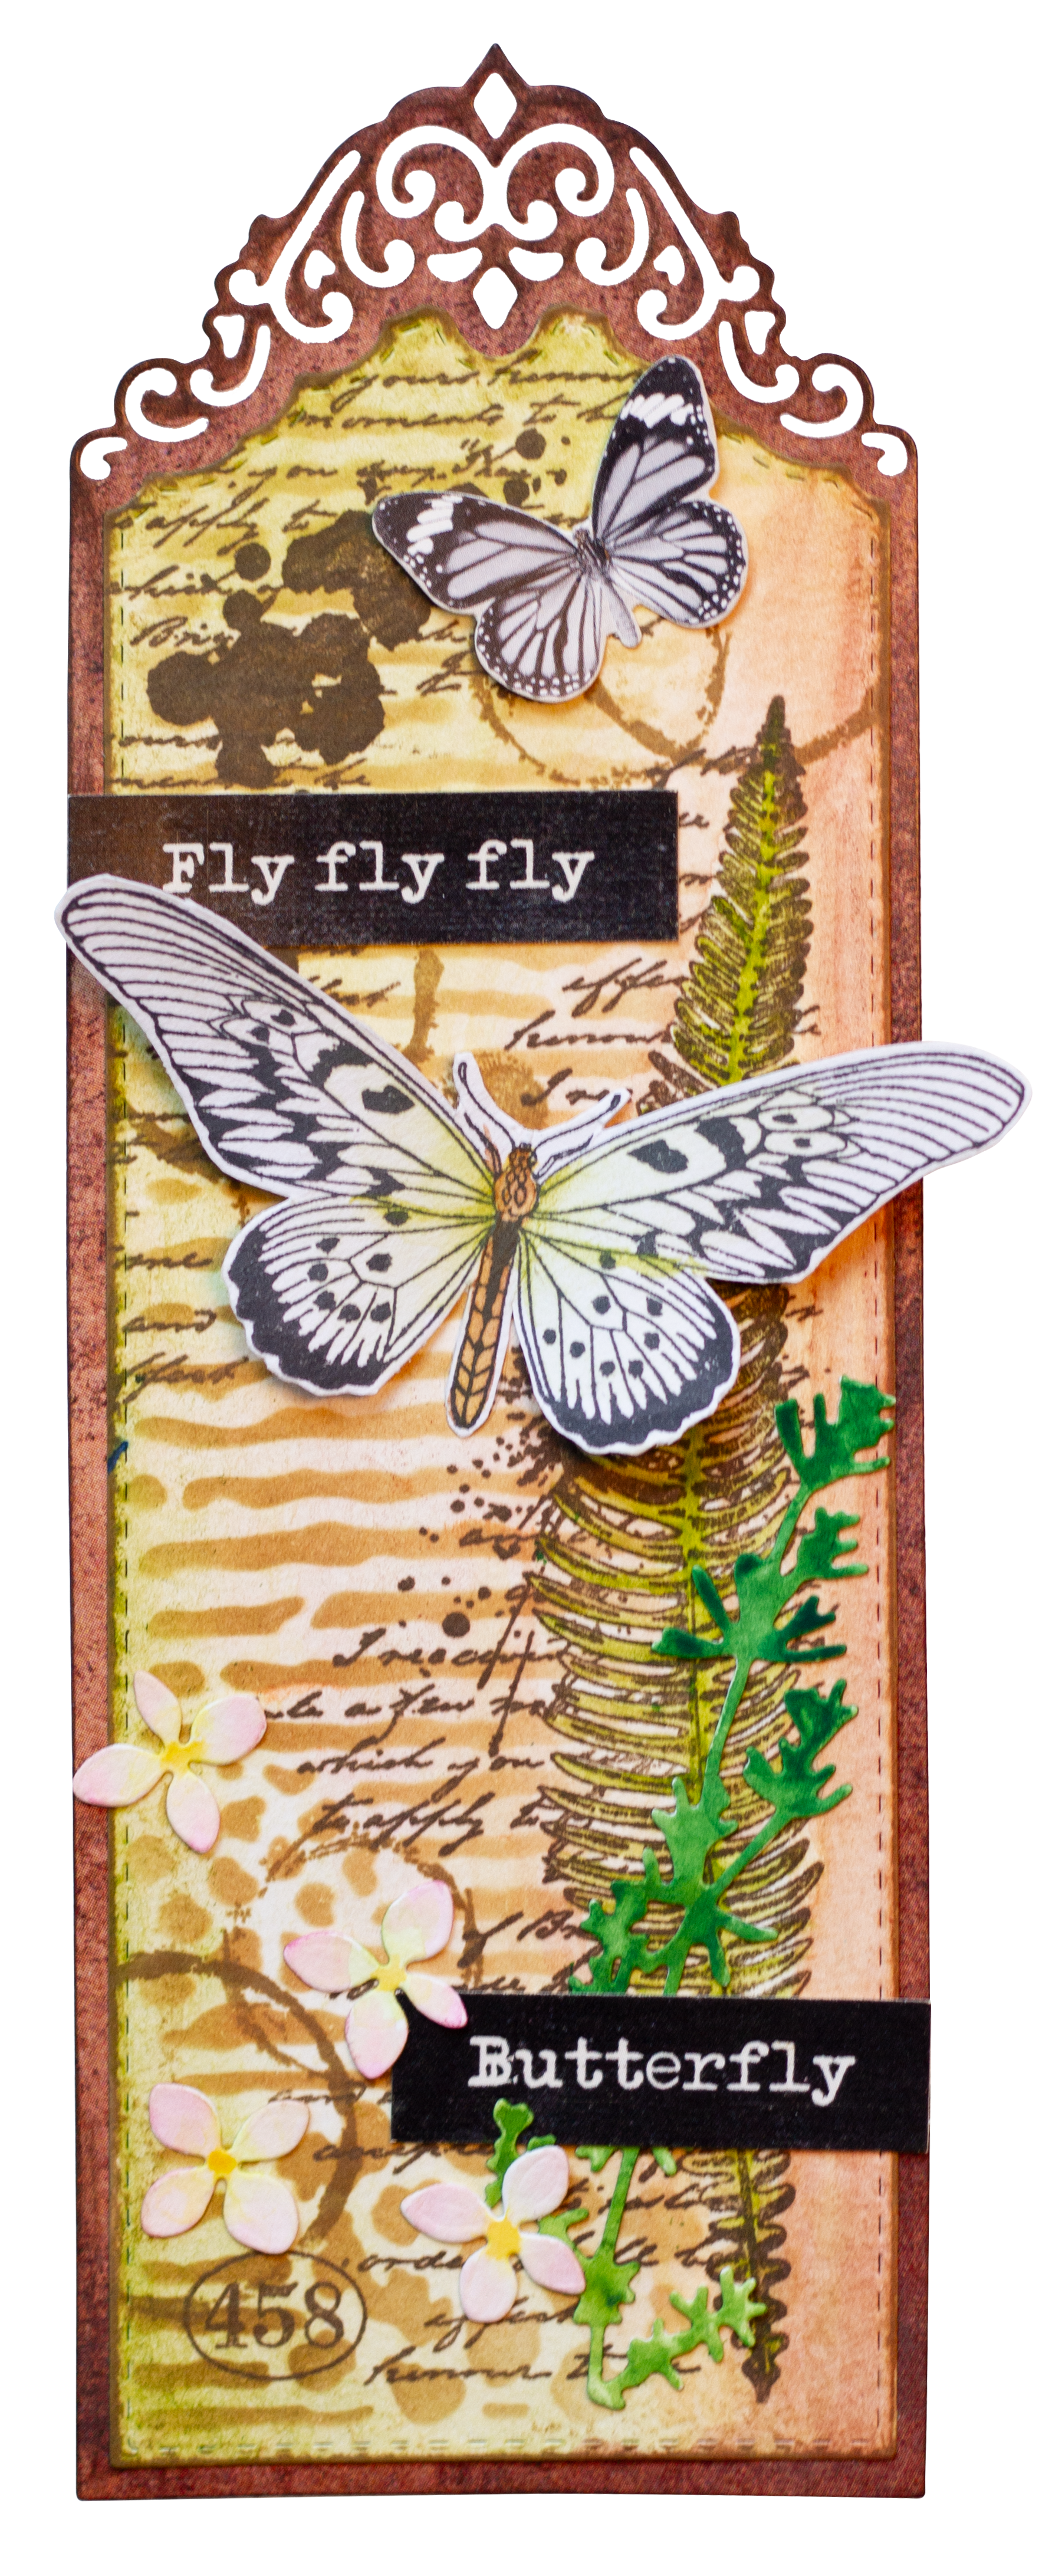 SL Clear Stamp The Butterflies Grunge Collection 14 PC